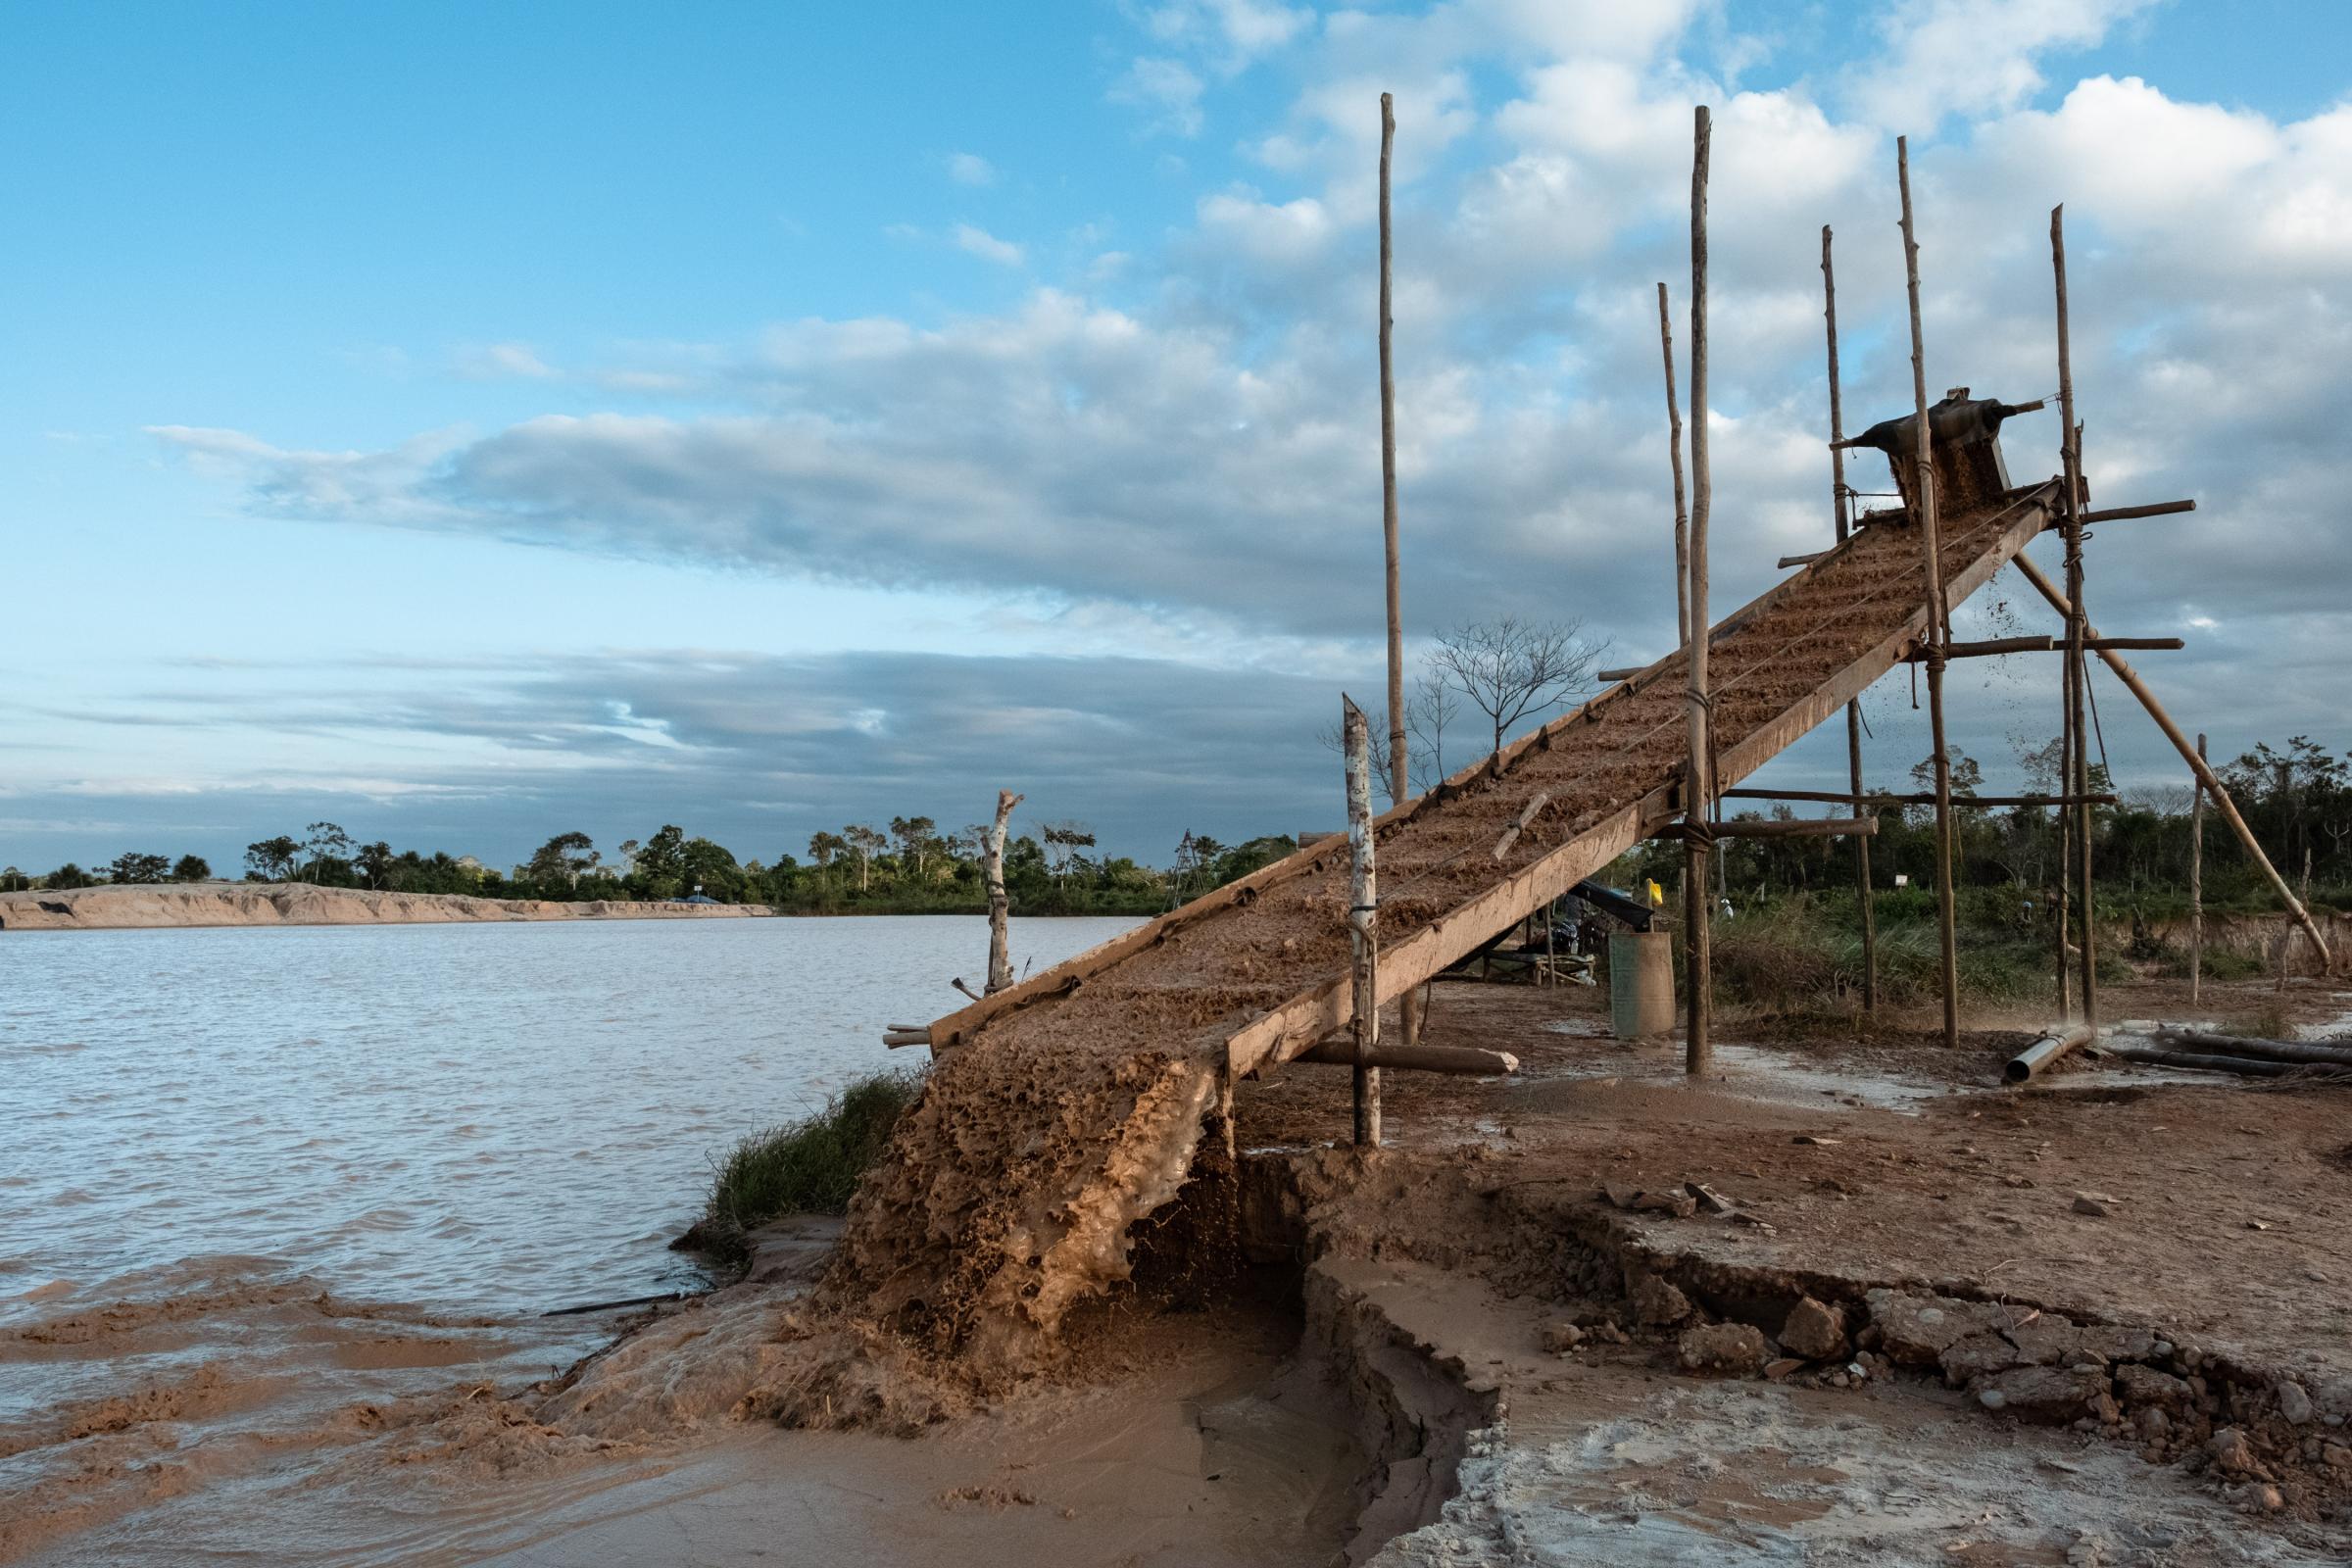 Illegal Gold Mining in La Pampa - The mining camp on the Inter-Oceanic Highway South,...